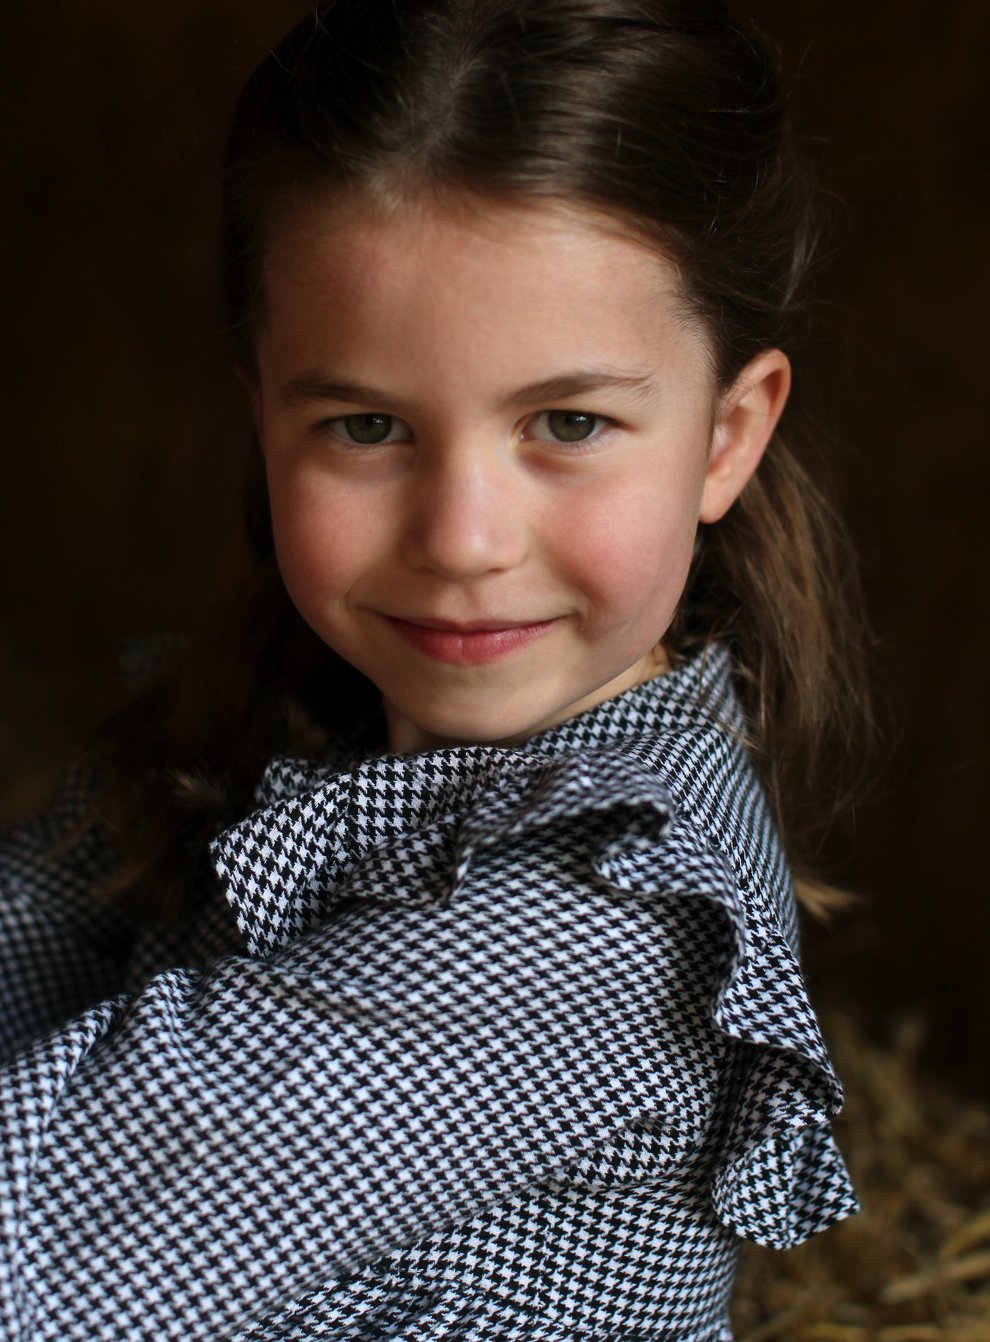 Pictures of Princess Charlotte have been released to mark her fifth birthday on Saturday. Duchess of Cambridge.